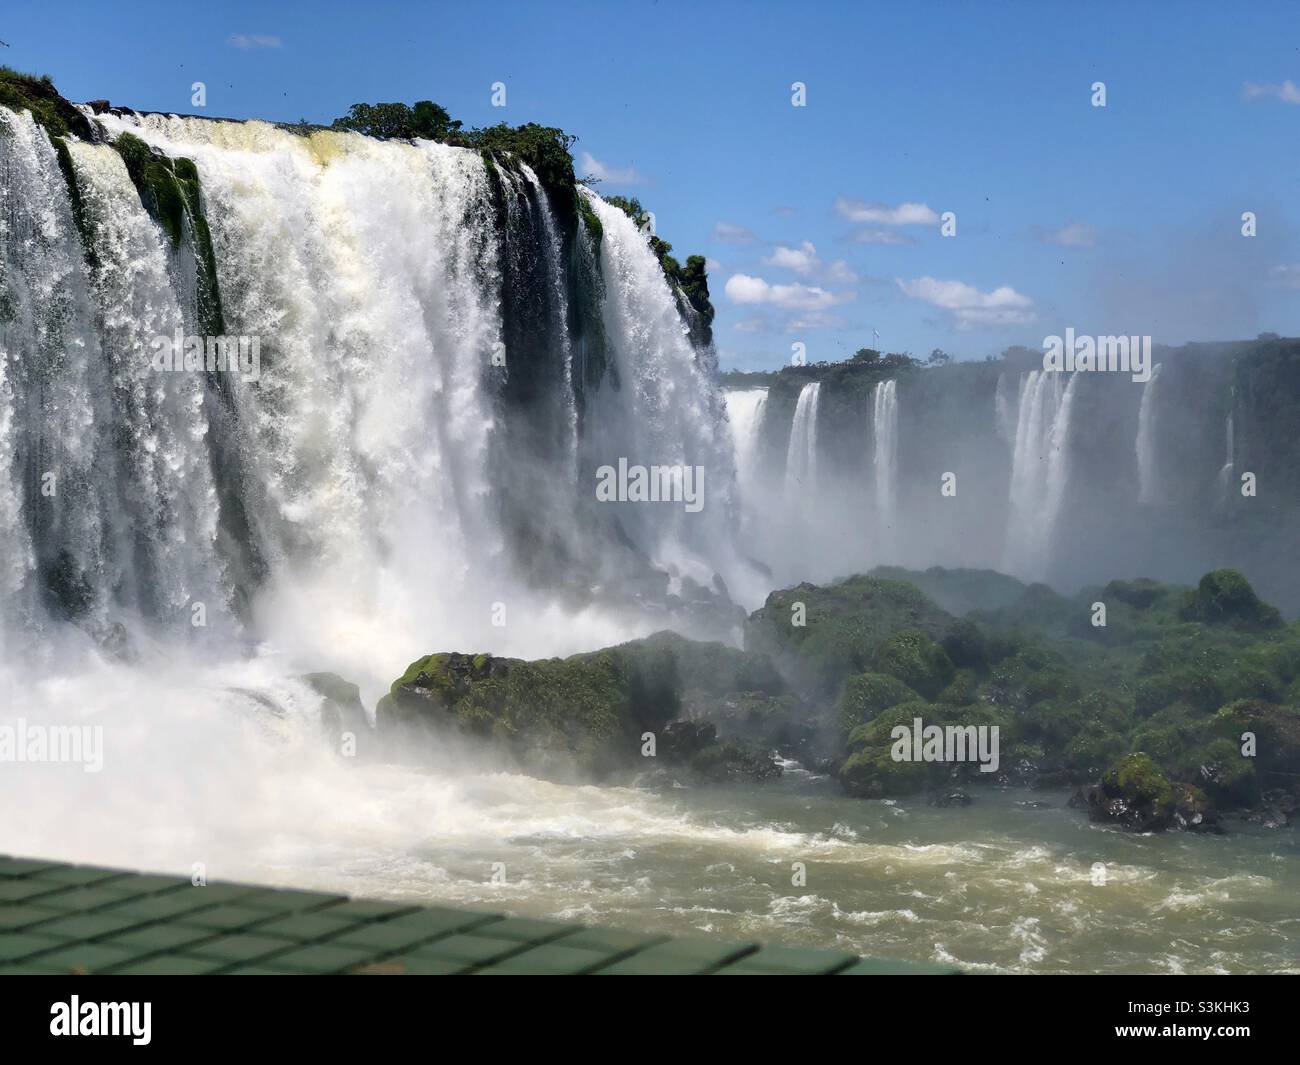 Iguaçu Falls, located in the State of Paraná, Brazil, one of the new seven wonders of nature Stock Photo